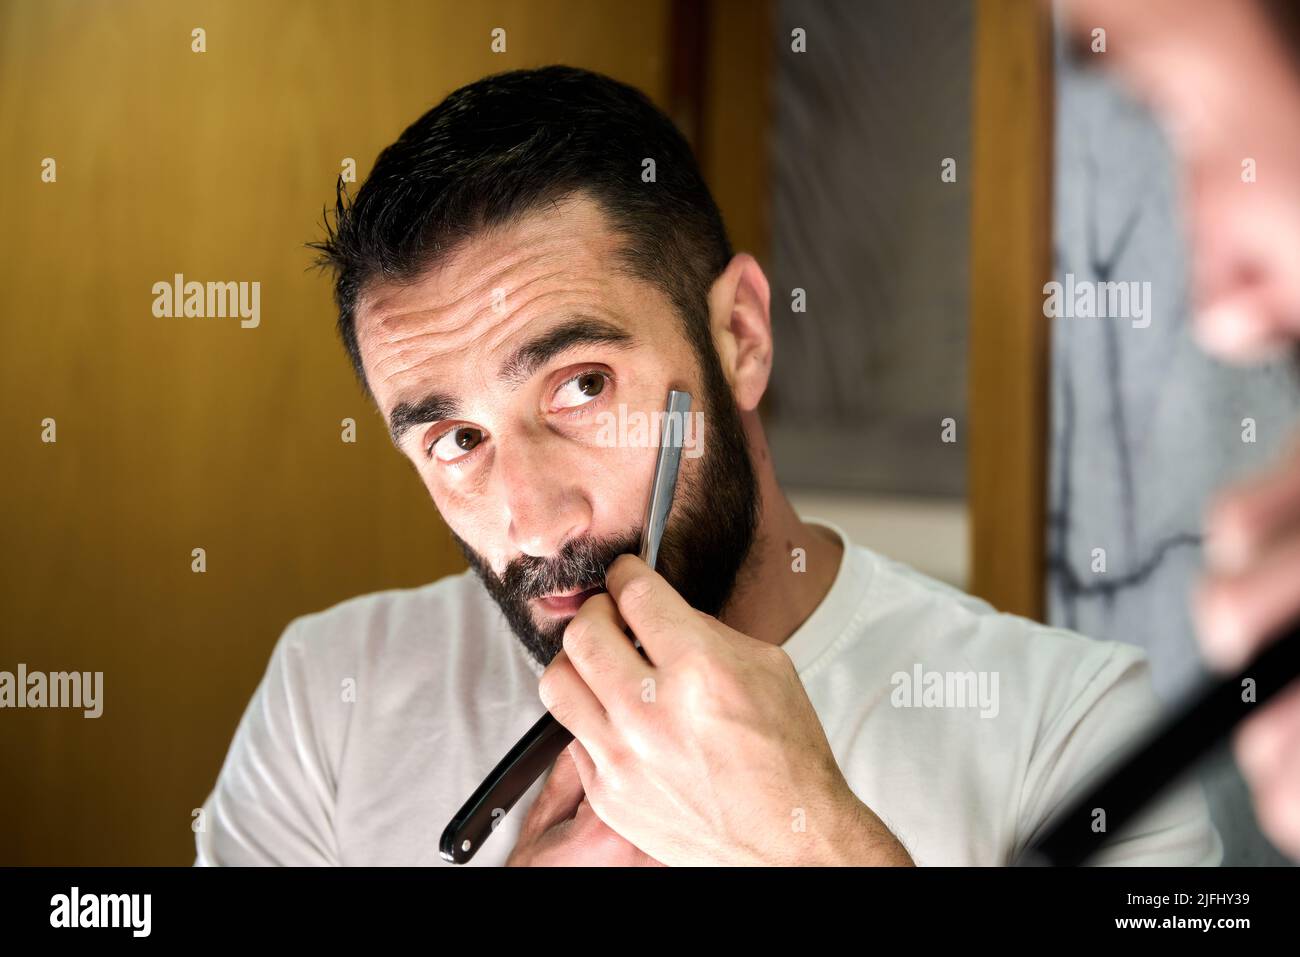 Young man with a beard shaving with a traditional knife in front of the mirror. High quality photo Stock Photo